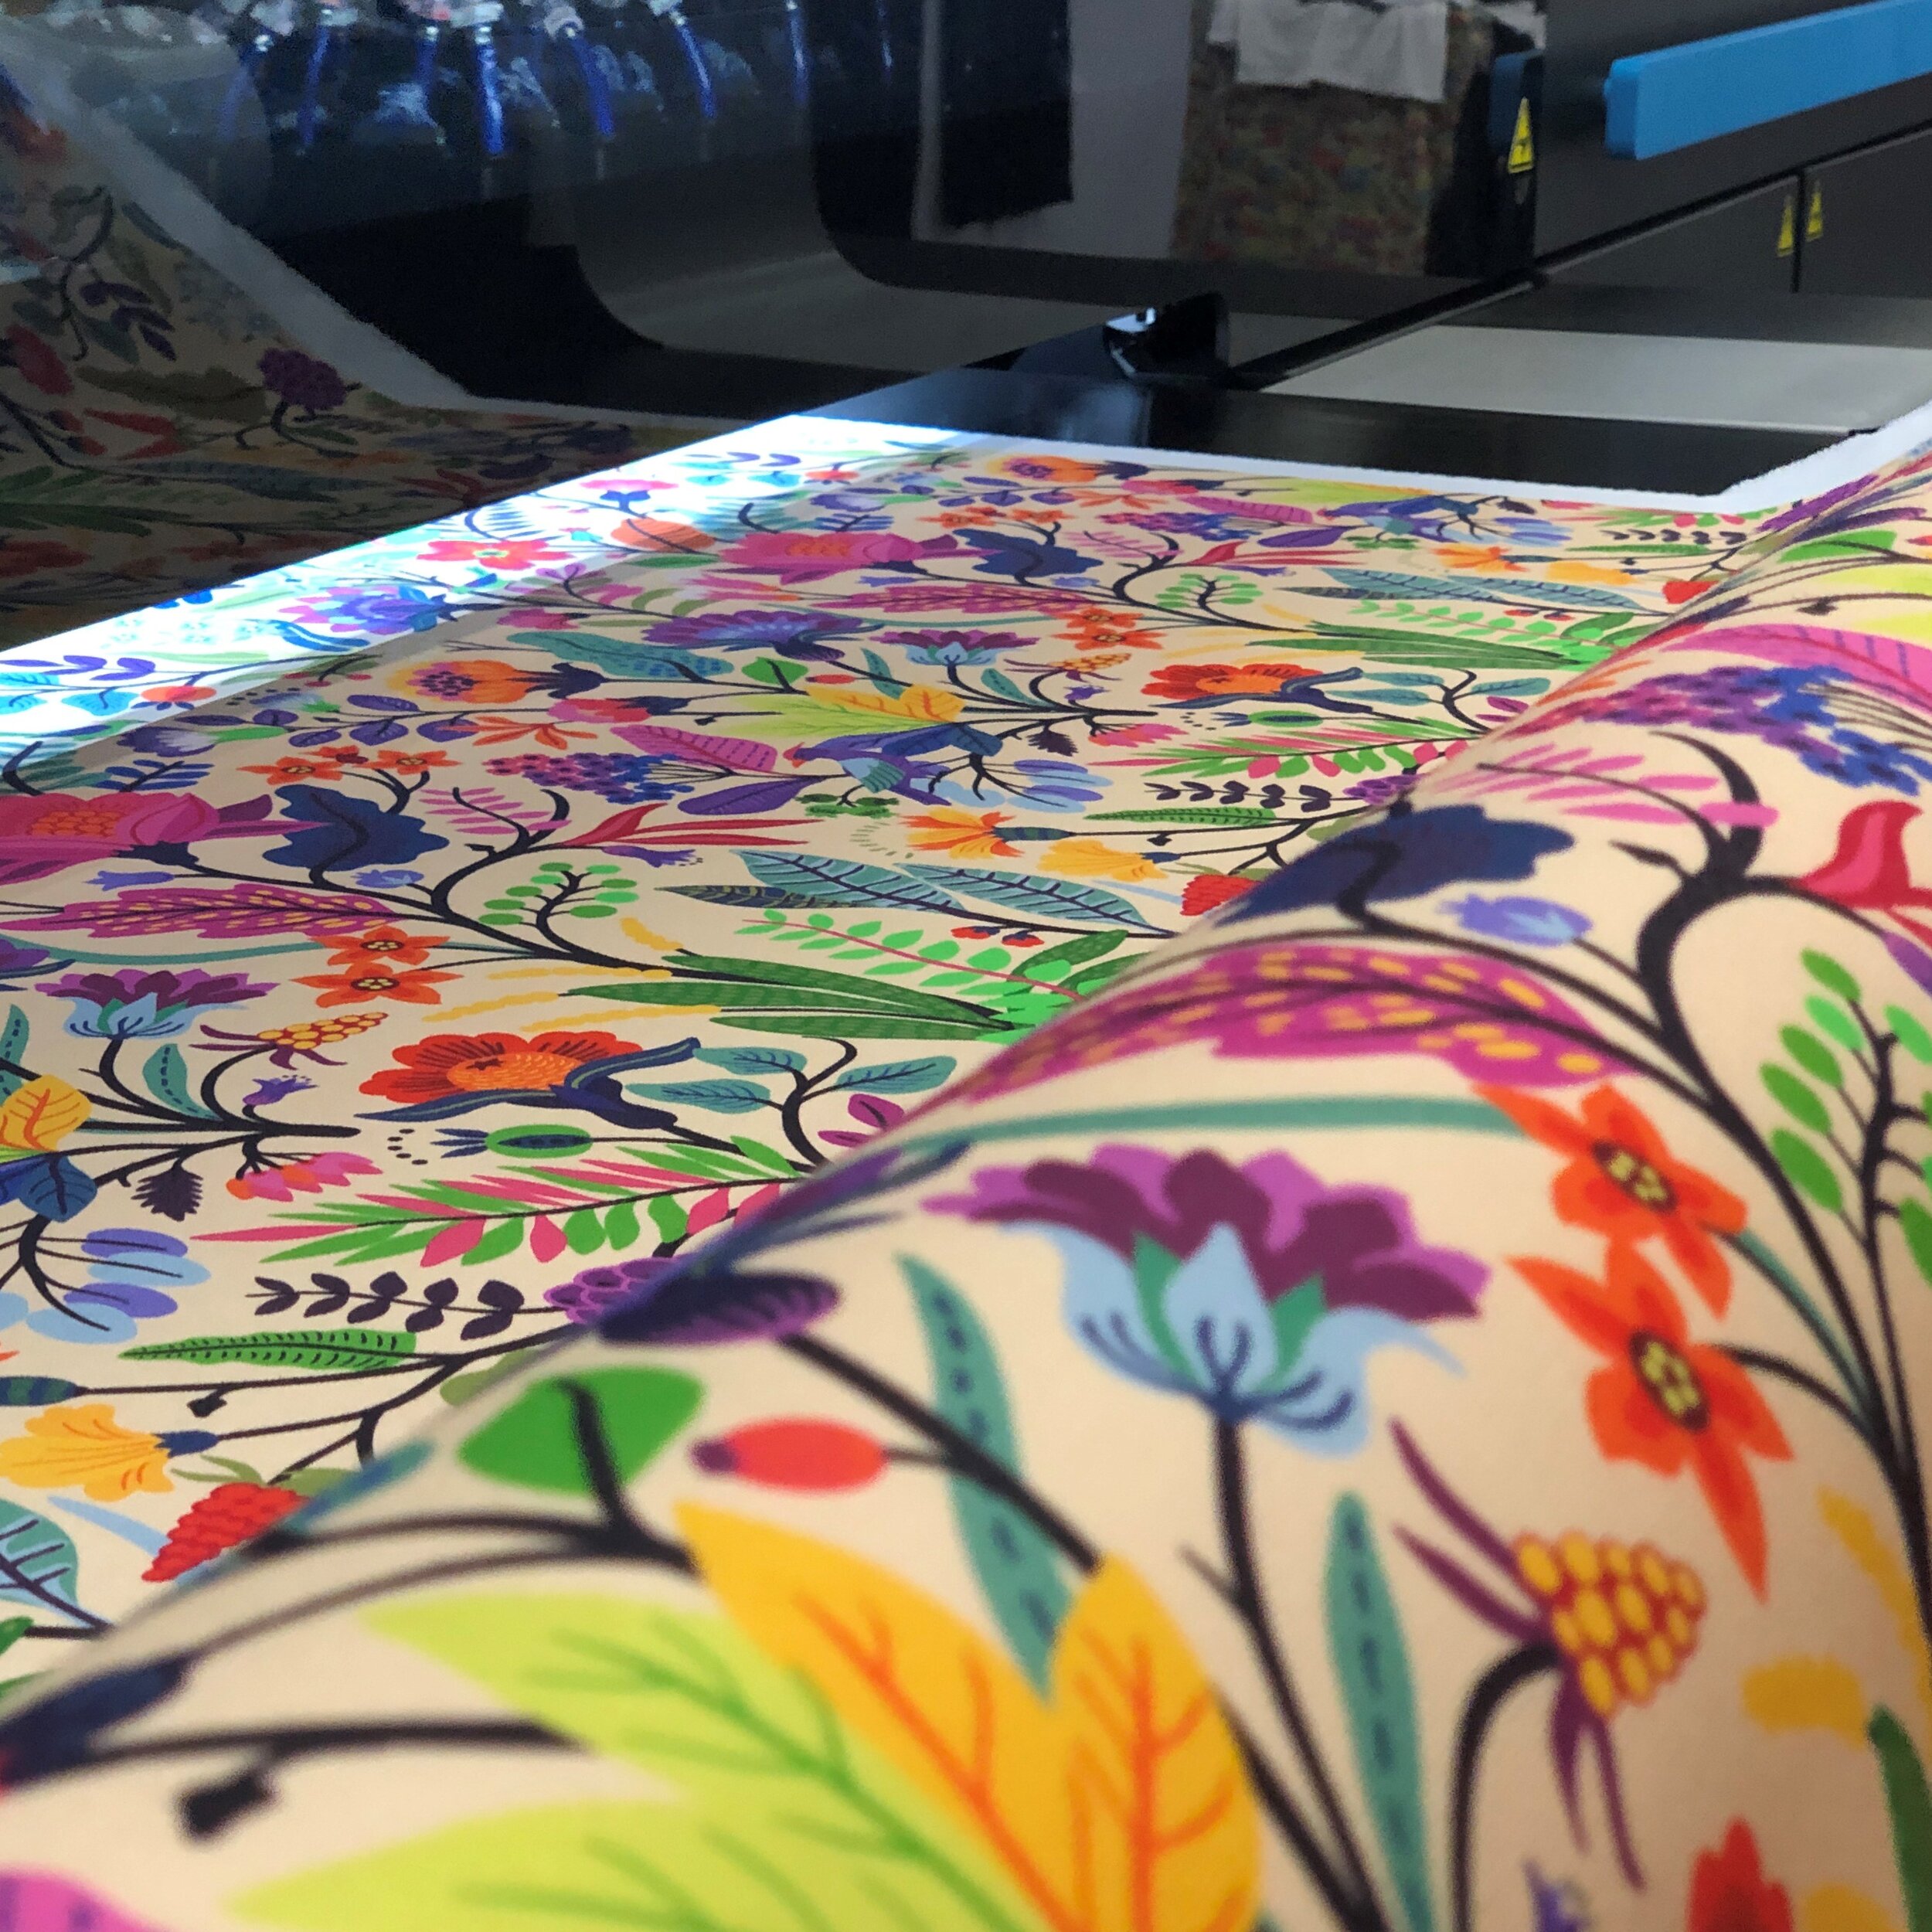 digital textile printing machine Online Sale, UP TO 51% OFF